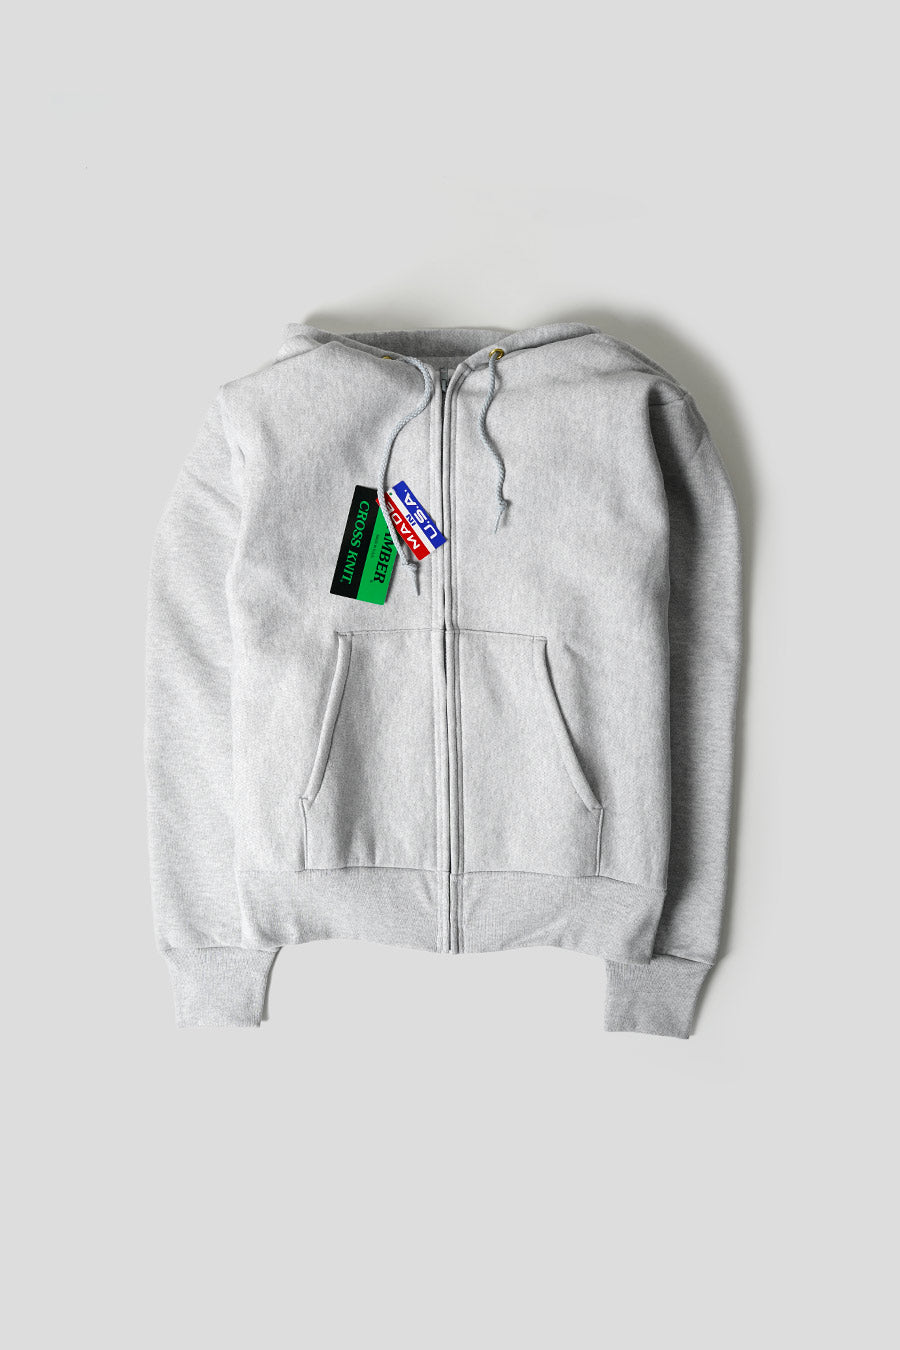 CAMBER USA - HOODIE ZIP CROSS KNIT GREY - LE LABO STORE